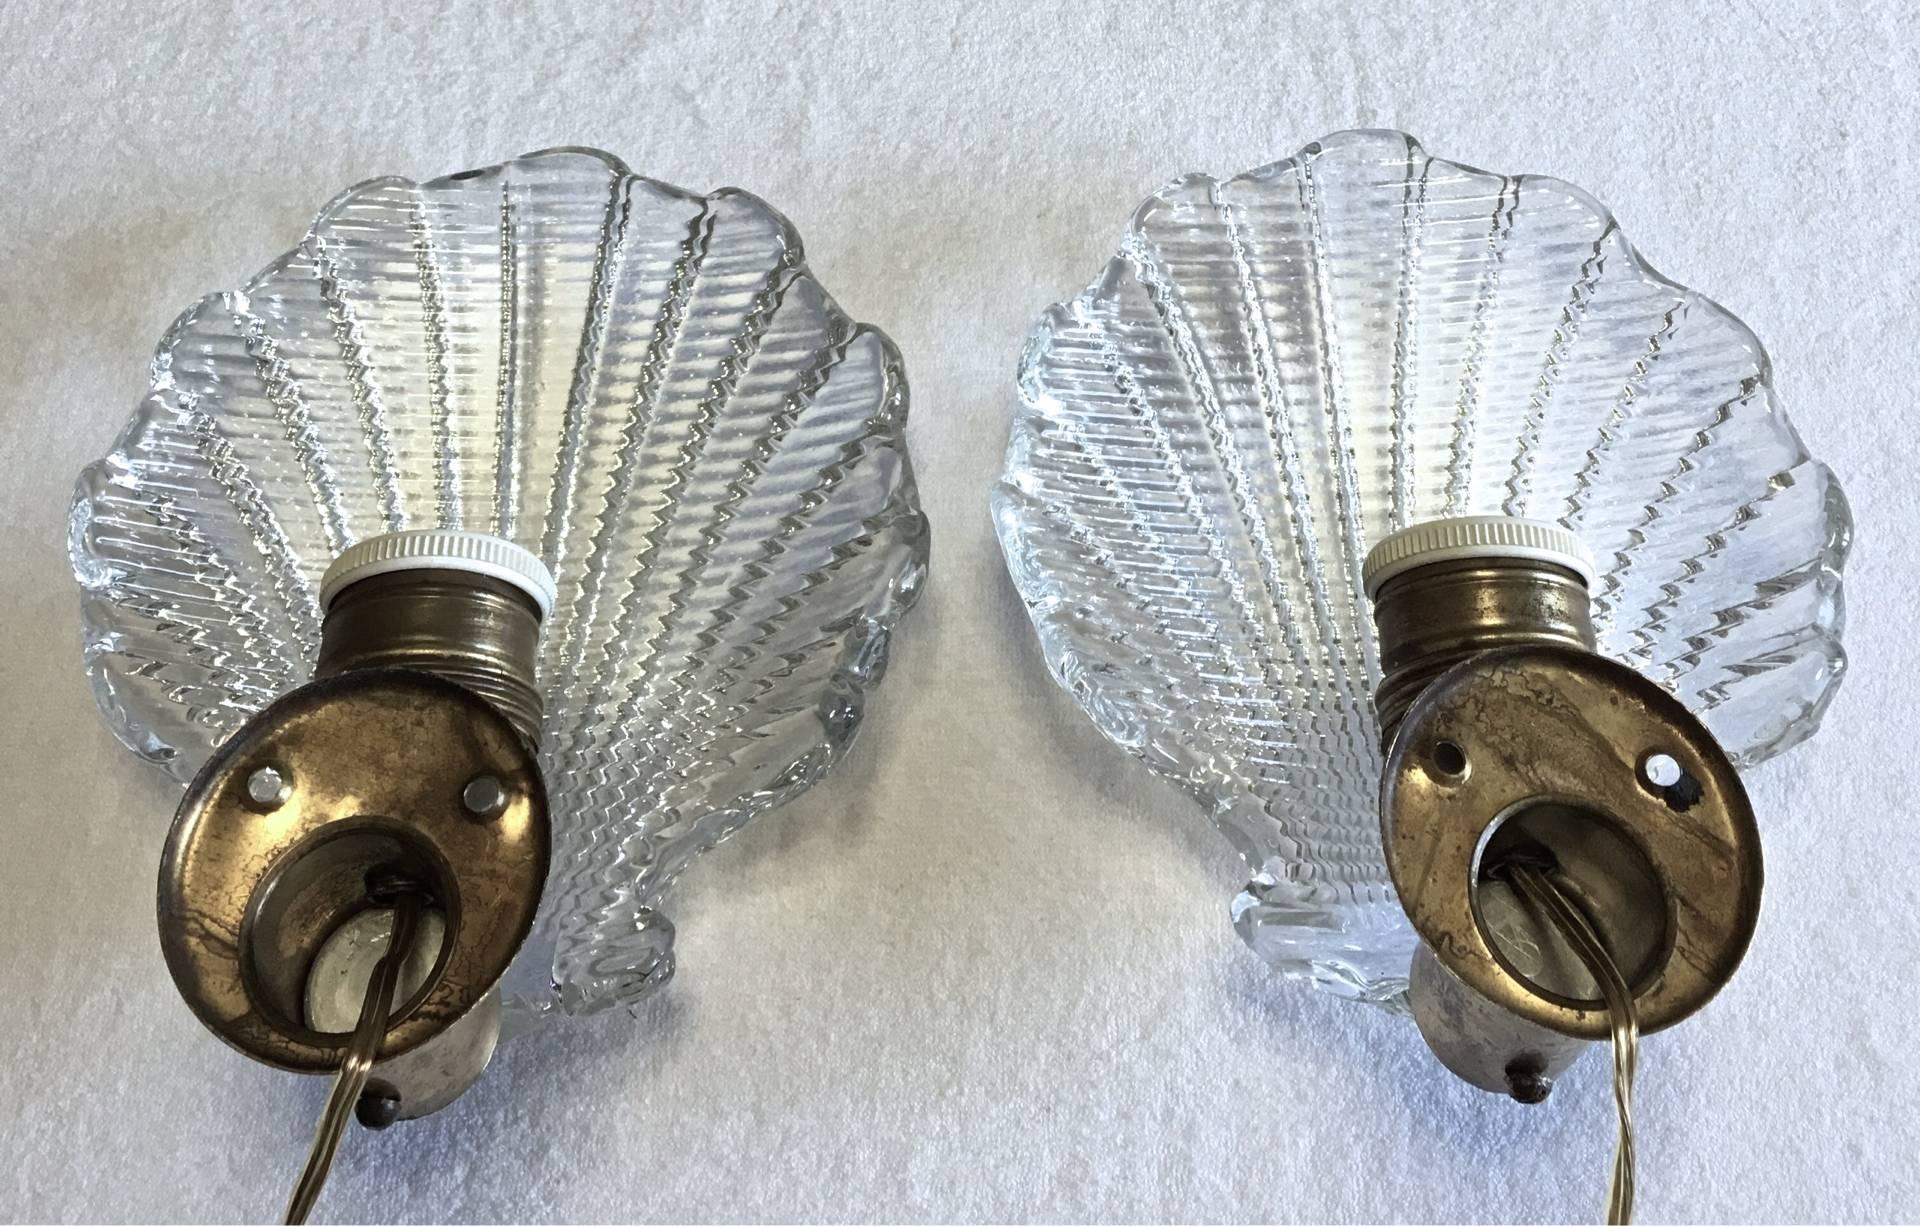 Italian Mid-Century regency style wall lights in shell design with brass fixture and handblown Venetian glass diffusers.